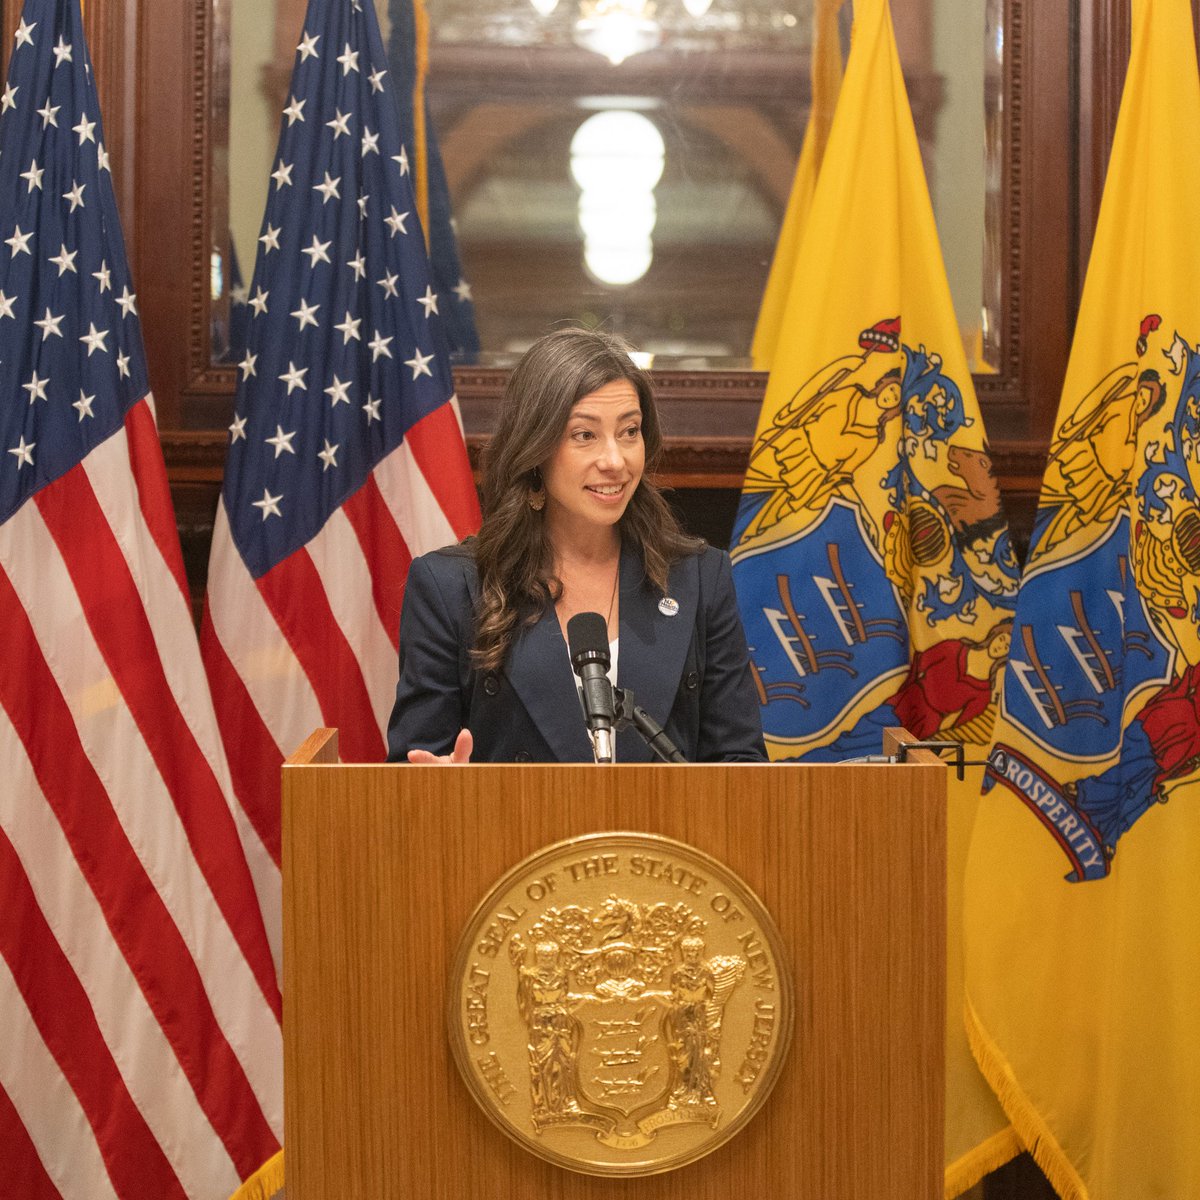 Honored to host the swearing-in for our new @NJDeptofHealth Commissioner Dr. Kaitlan Baston! Dr. Baston's background in behavioral health, public health, and maternal & infant care makes her uniquely qualified to lead the Department of Health & build a healthier future for all.